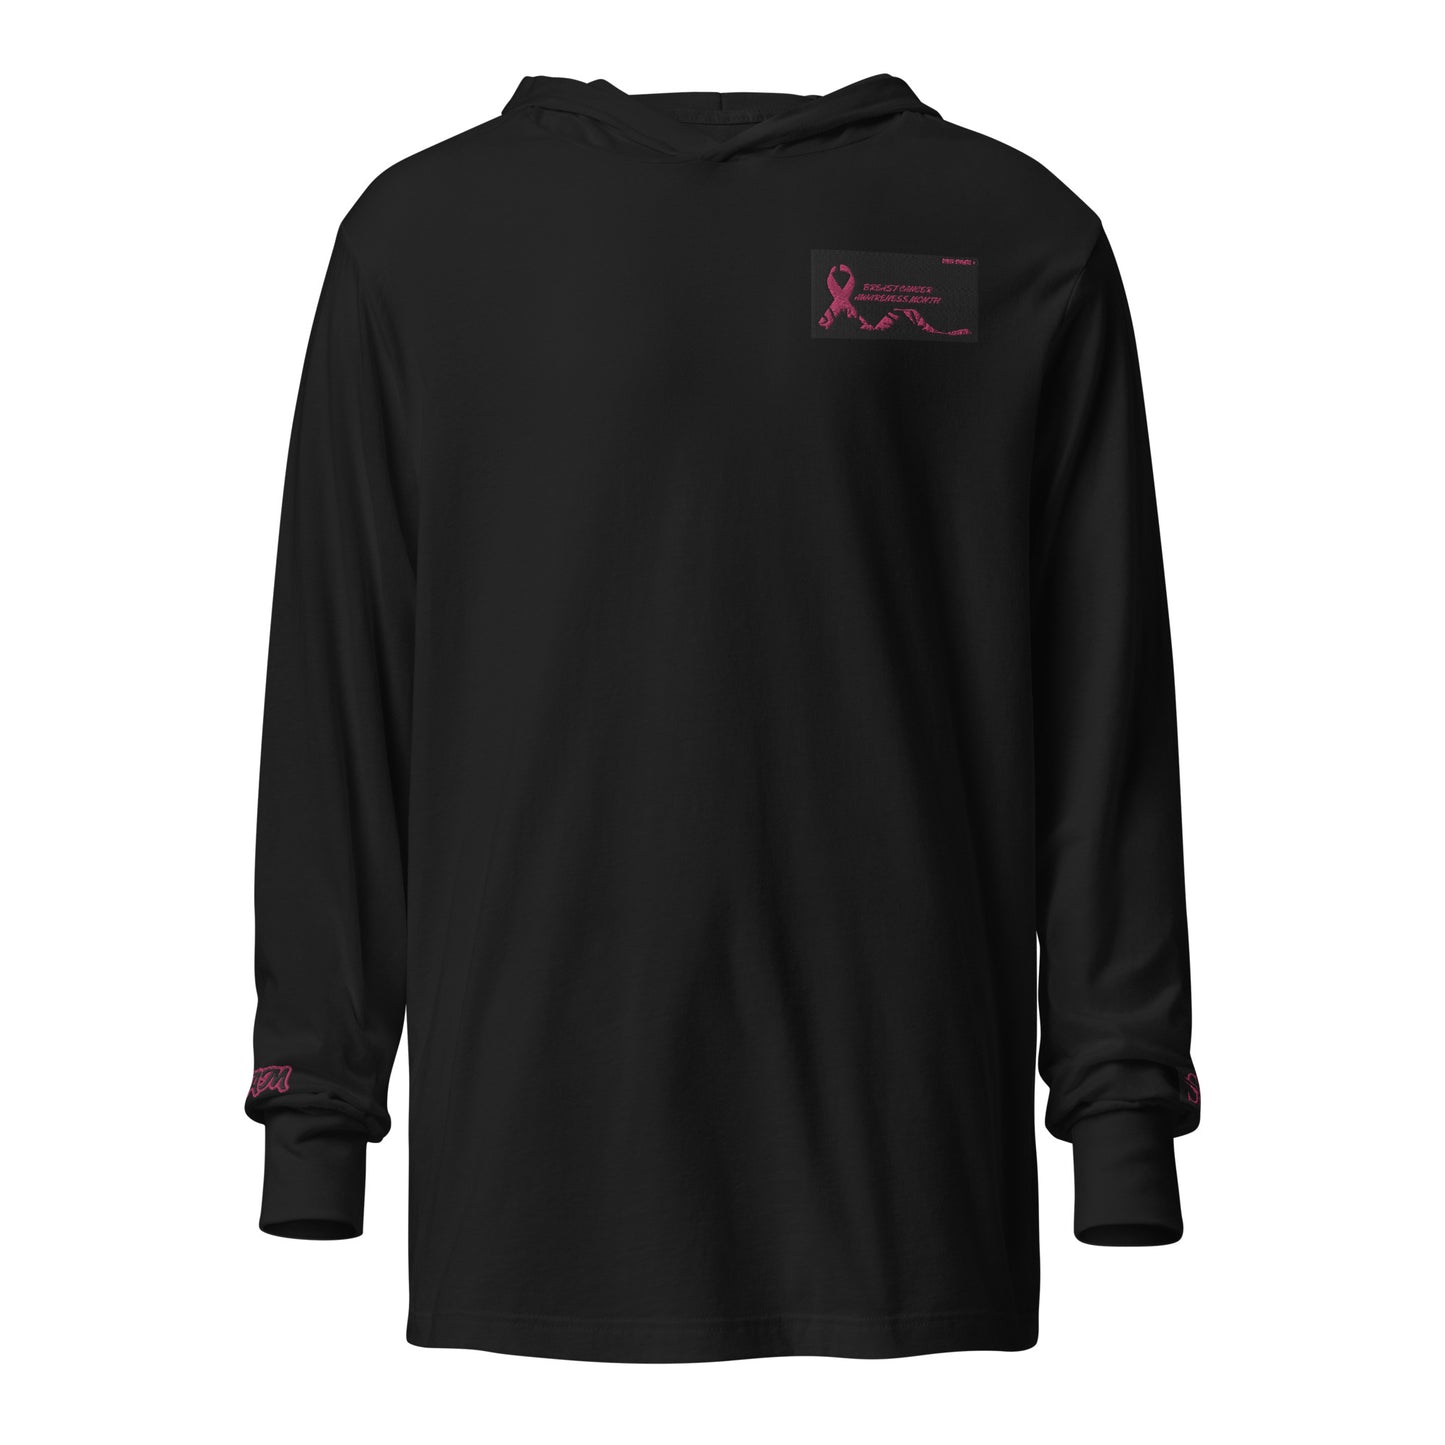 Breast Cancer Awareness Month Hooded Long-Sleeve Tee